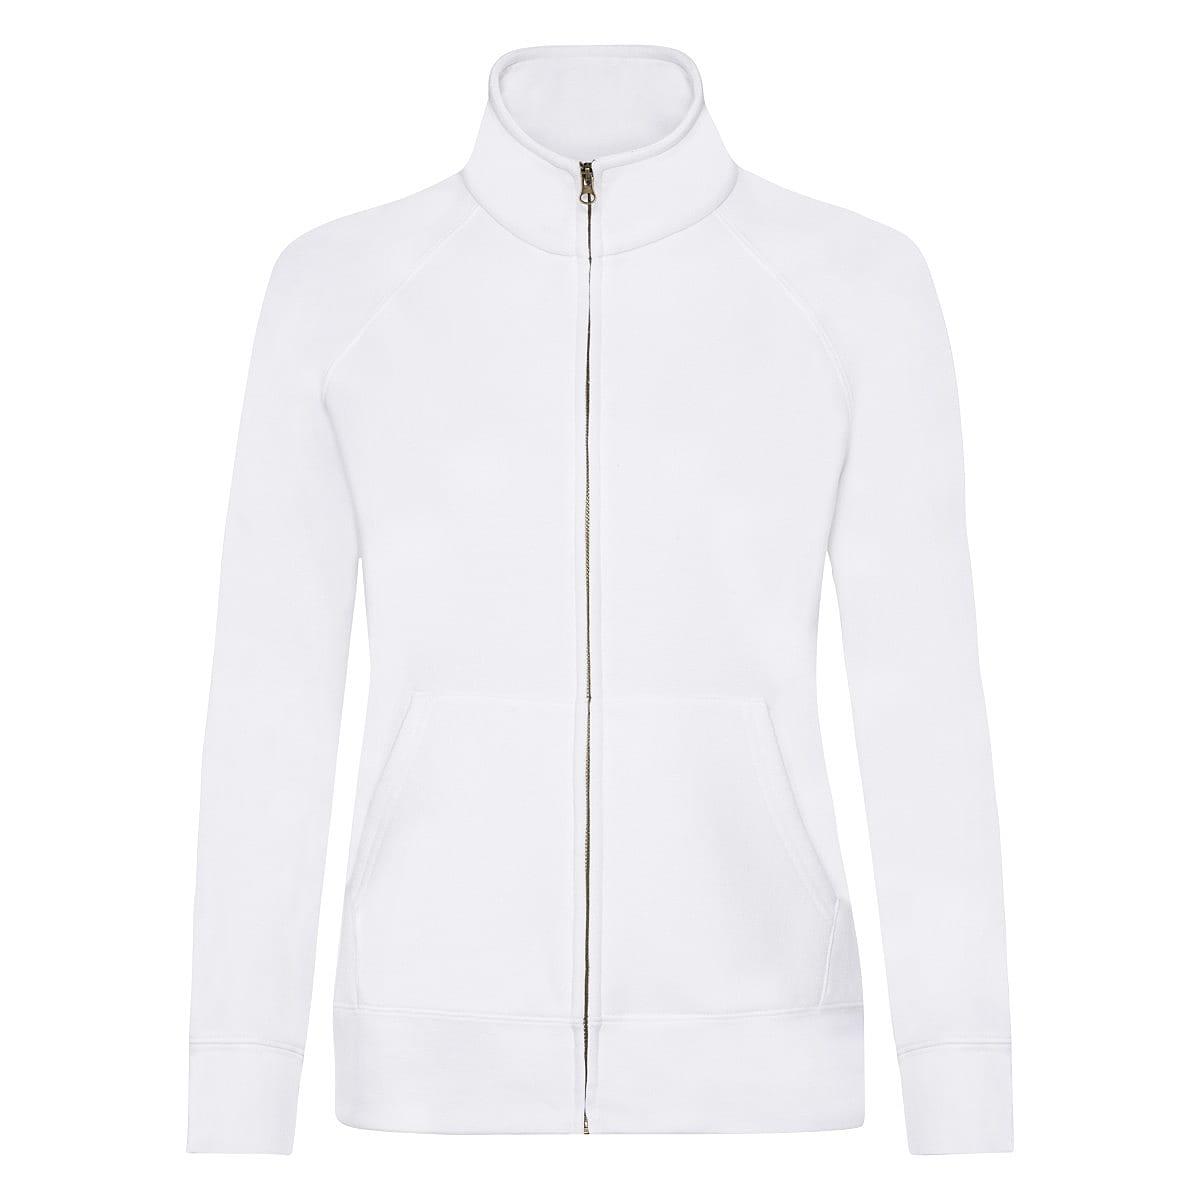 Fruit Of The Loom Lady-Fit Sweat Jacket in White (Product Code: 62116)